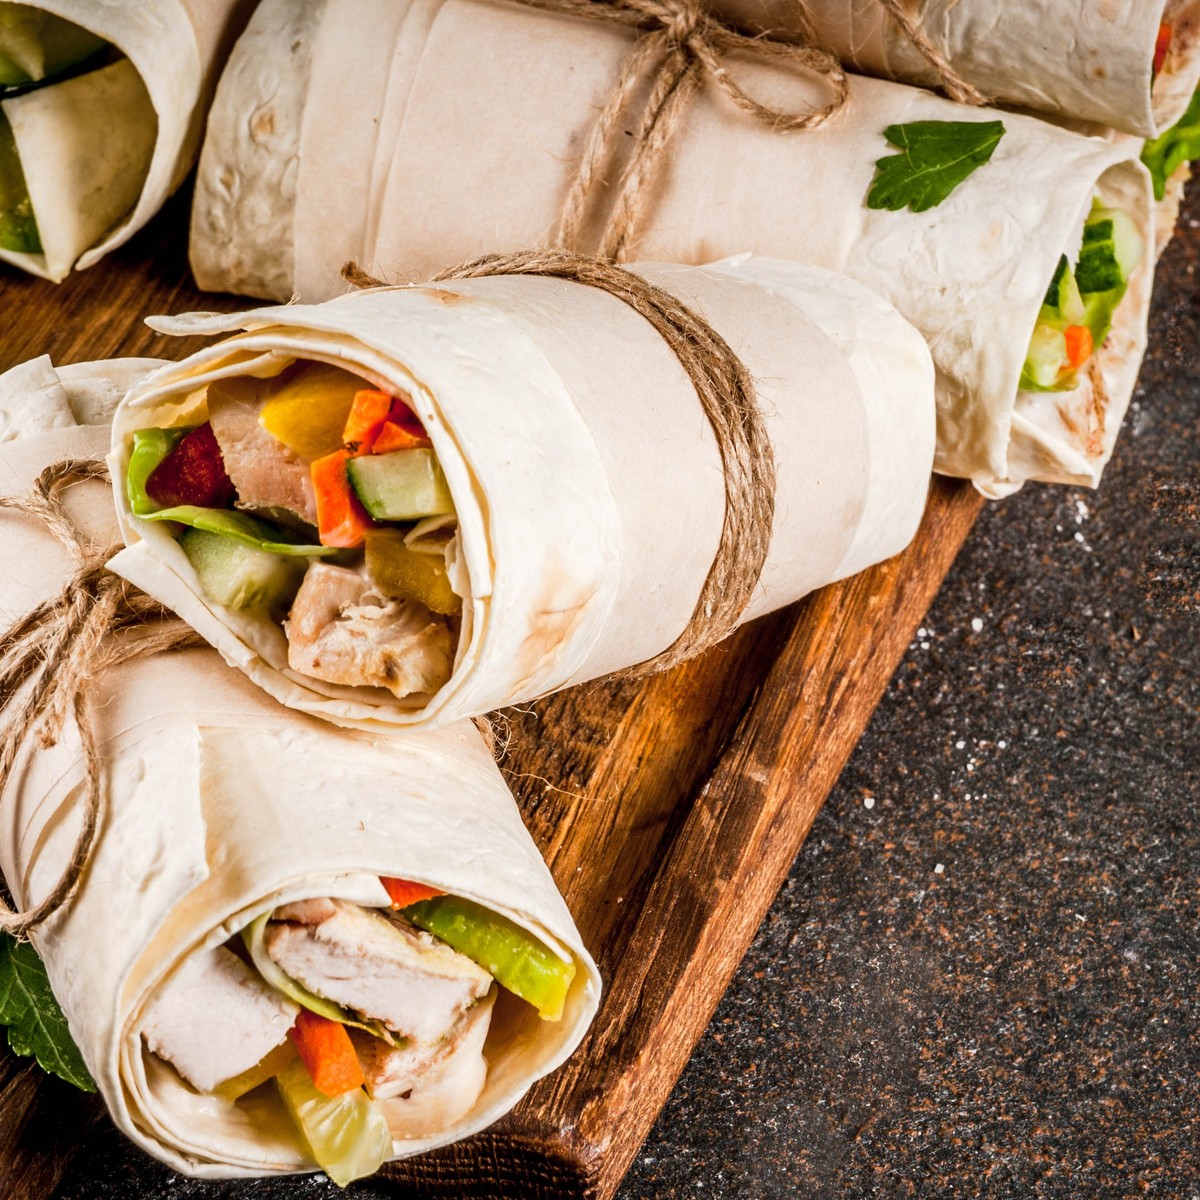 Order FIONA'S ULTIMATE WRAPS - Brewster, NY Menu Delivery [Menu & Prices]